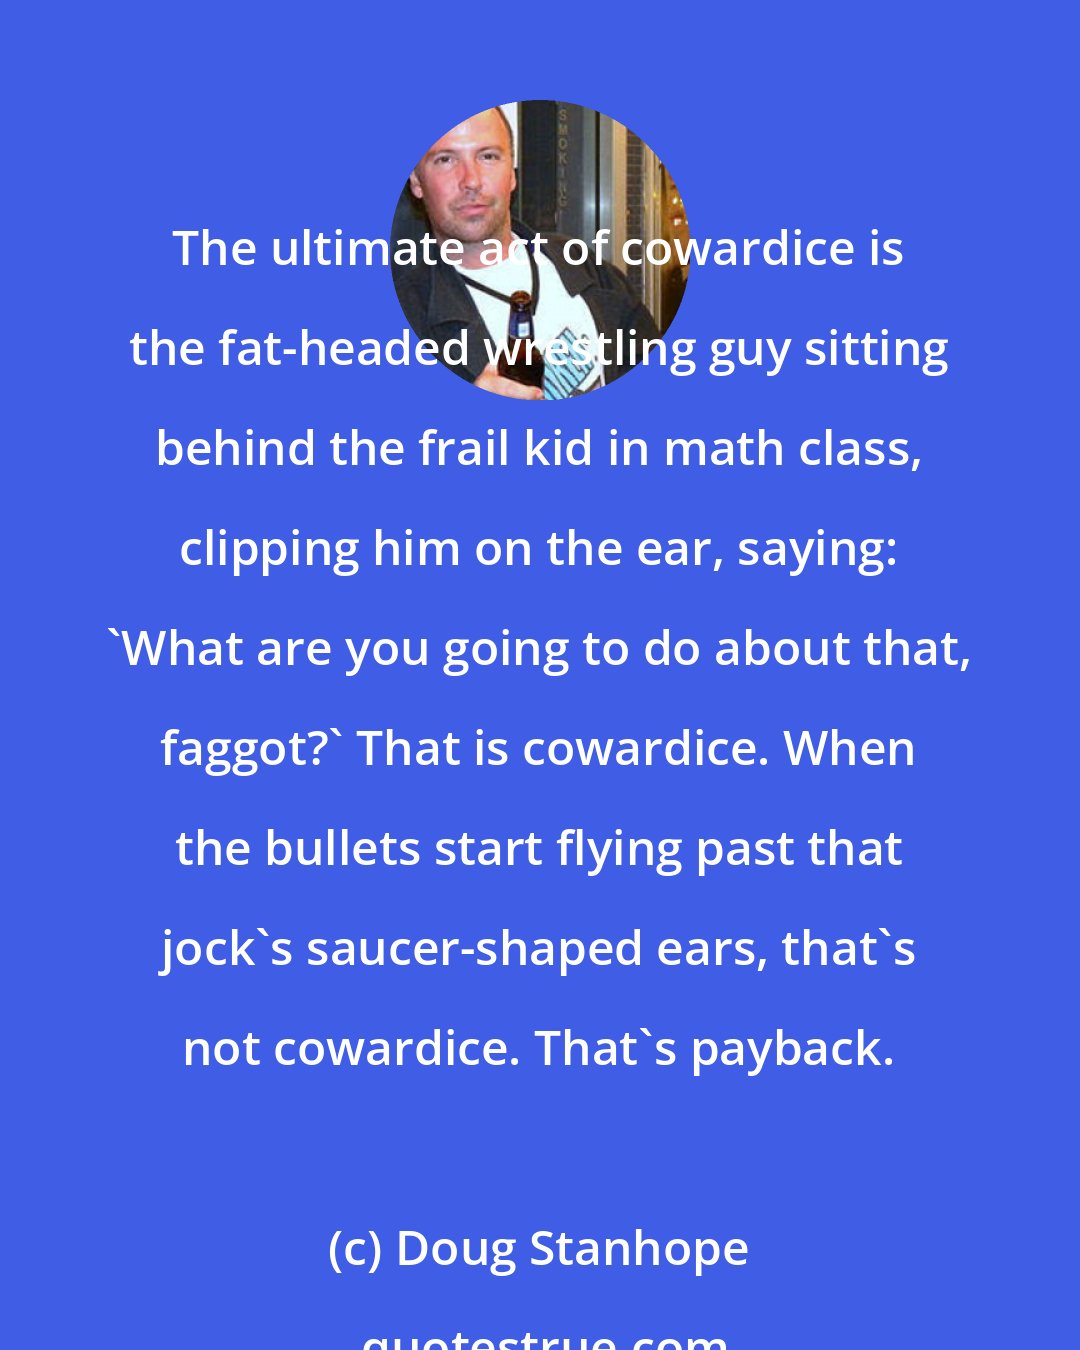 Doug Stanhope: The ultimate act of cowardice is the fat-headed wrestling guy sitting behind the frail kid in math class, clipping him on the ear, saying: 'What are you going to do about that, faggot?' That is cowardice. When the bullets start flying past that jock's saucer-shaped ears, that's not cowardice. That's payback.